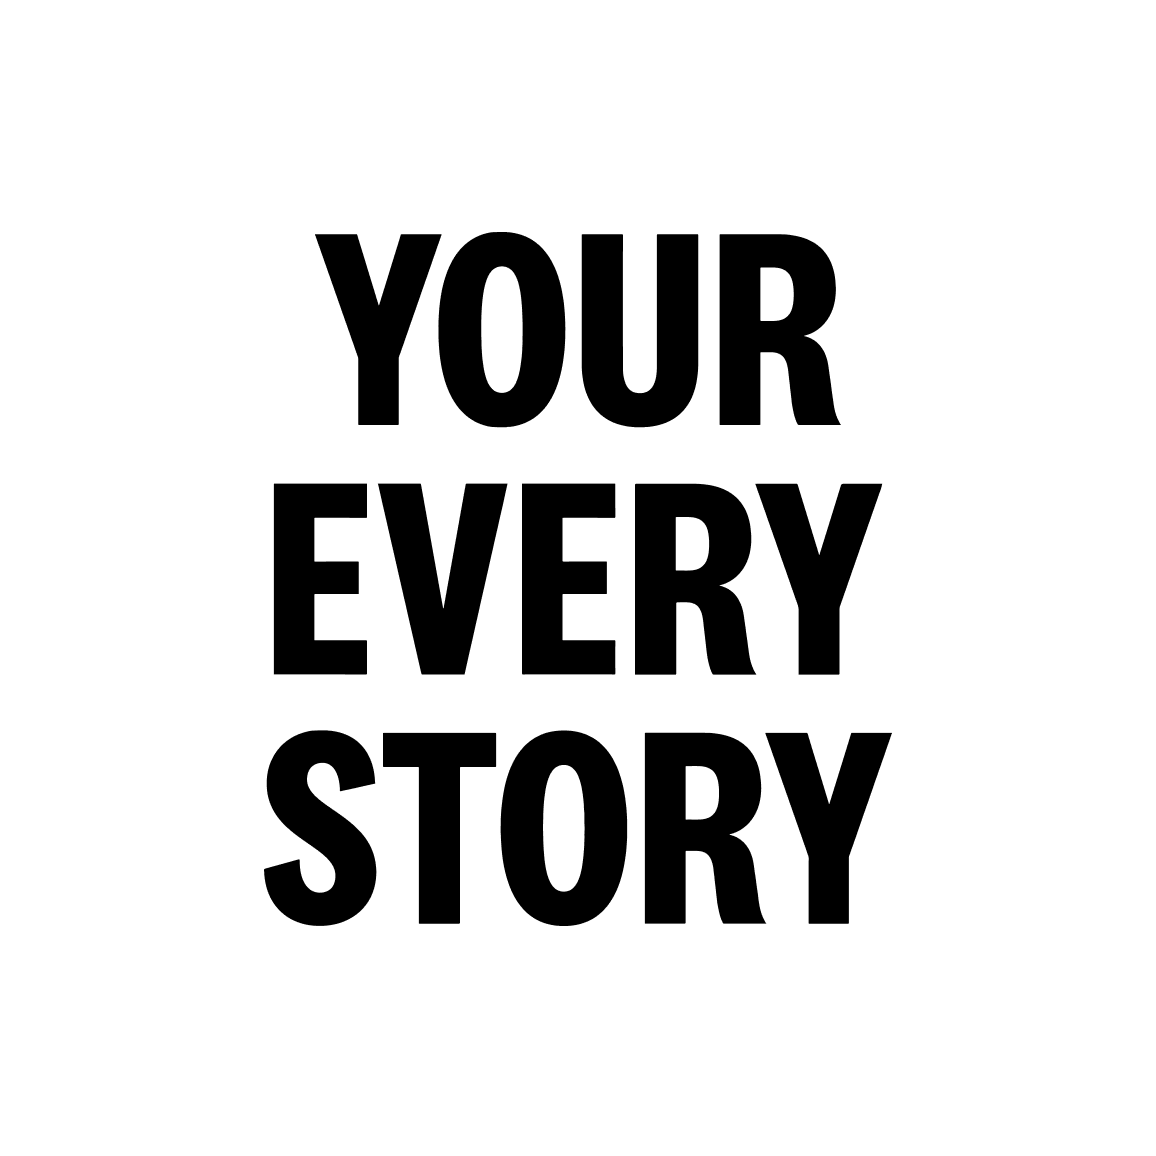 YOUR EVERY STORY